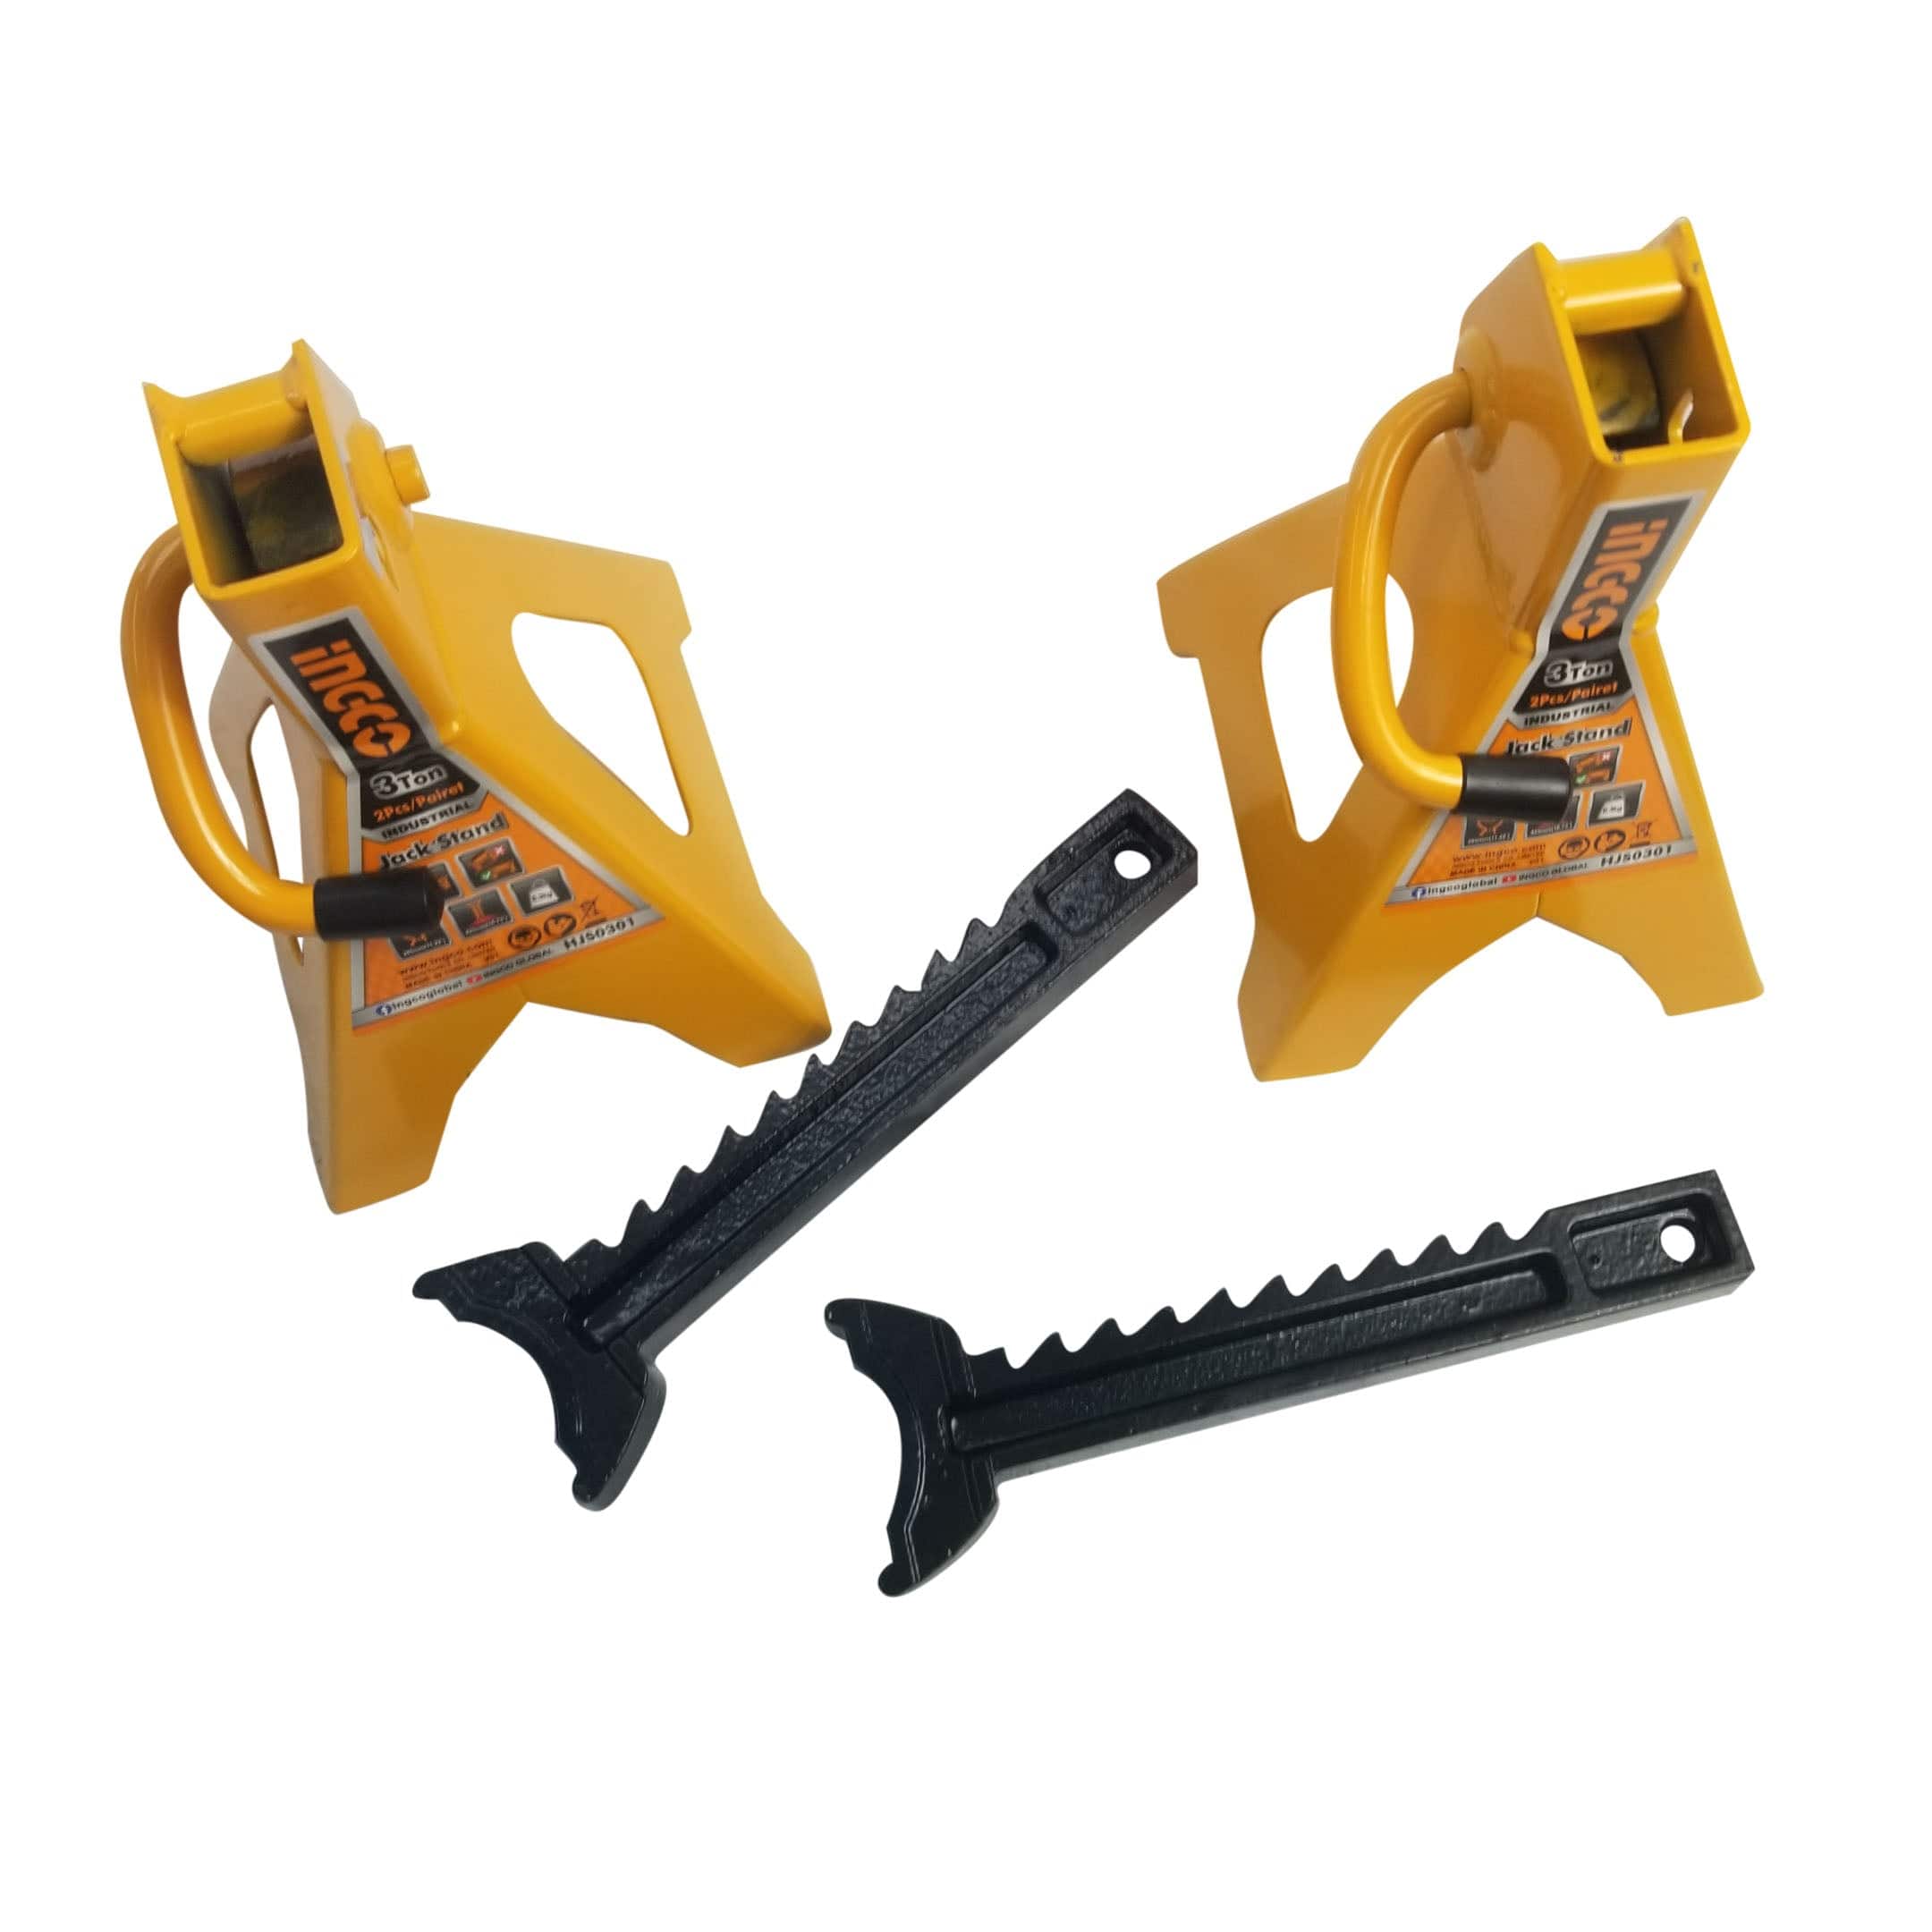 Ingco 3 Ton Jack Stand (2 Pair) - HJS0301 | Supply Master | Accra, Ghana Towing and Lifting Buy Tools hardware Building materials